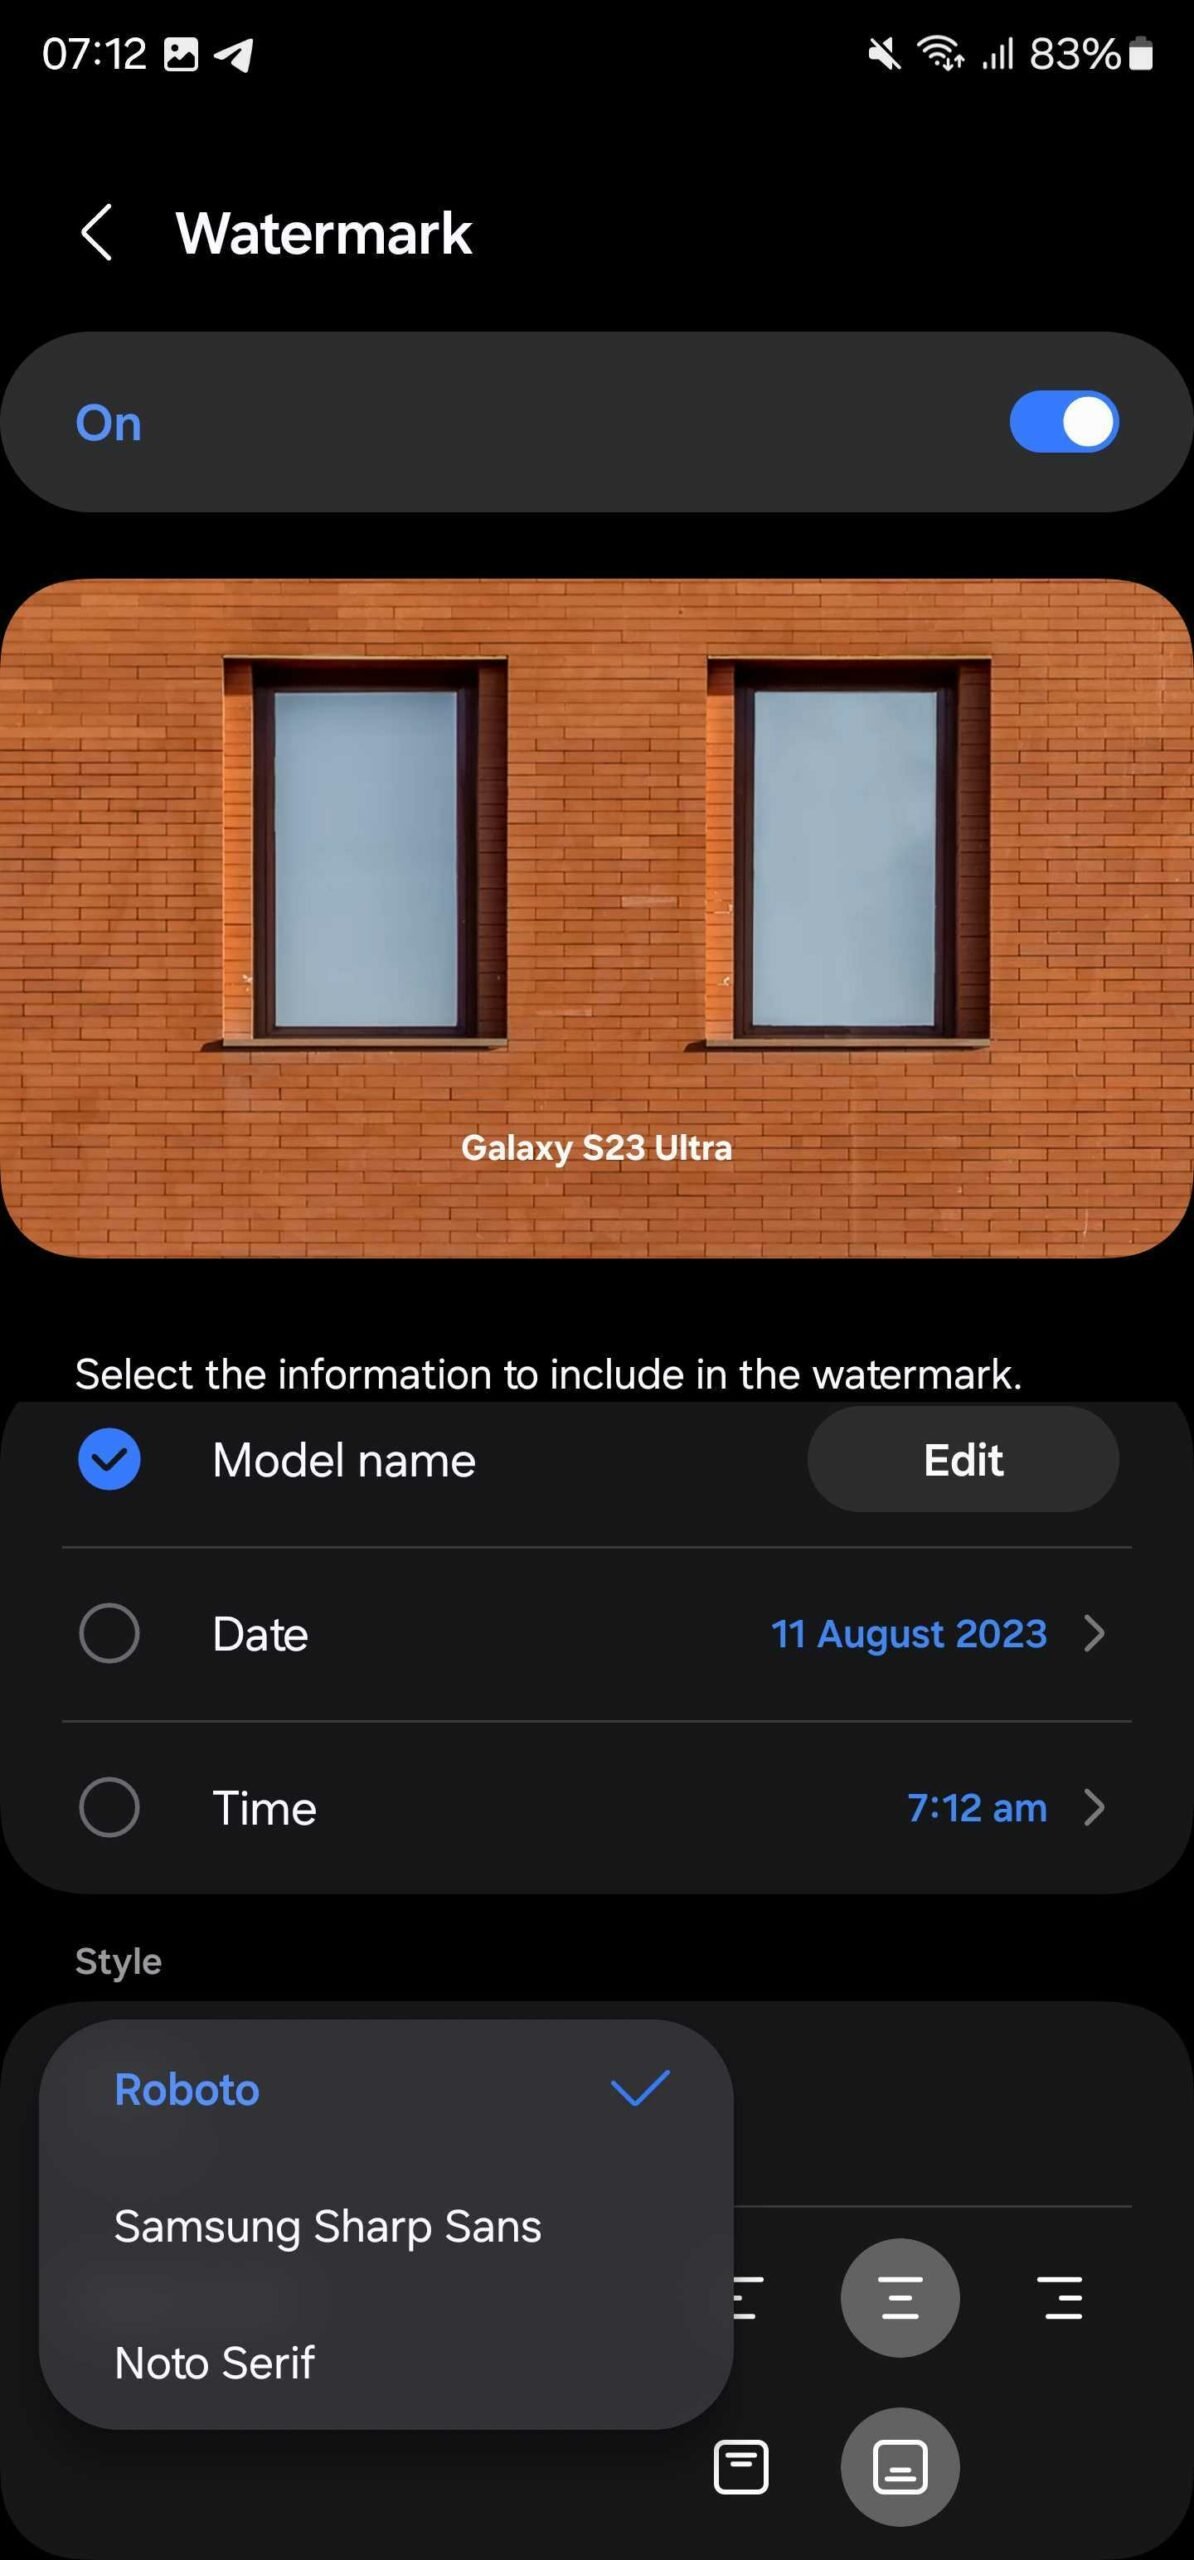 According to Sammobile.com One UI V6.0 Stable is I - Samsung Members